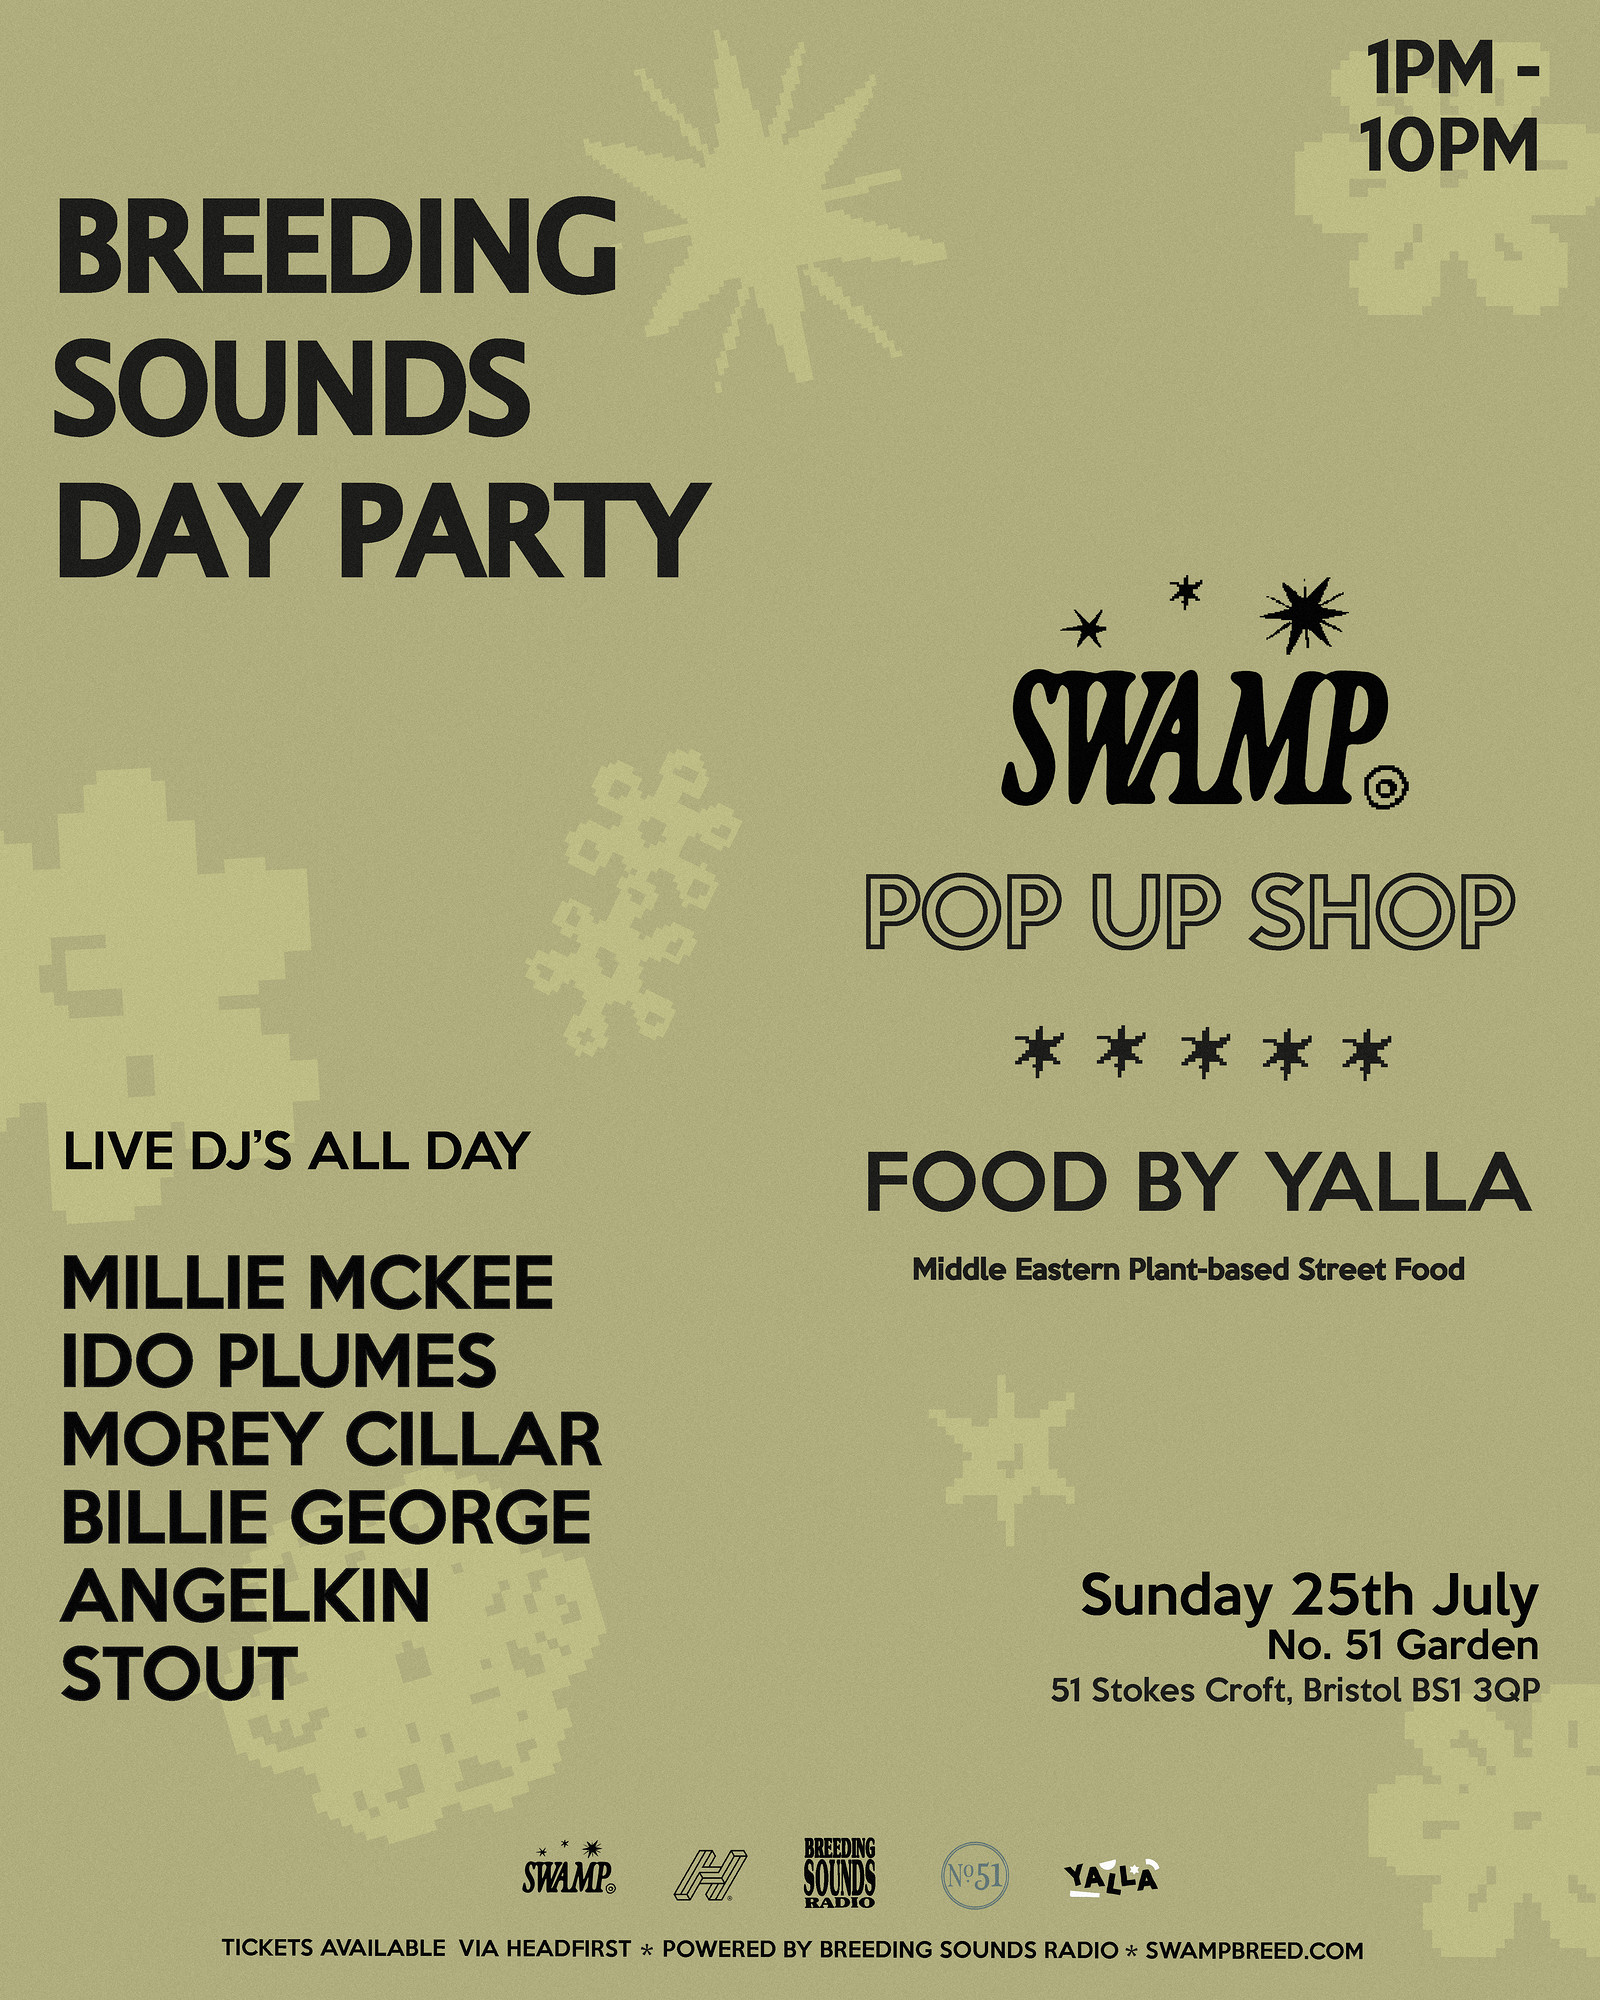 Breeding Sounds Day Party / Swamp Breed Pop Up at No. 51s